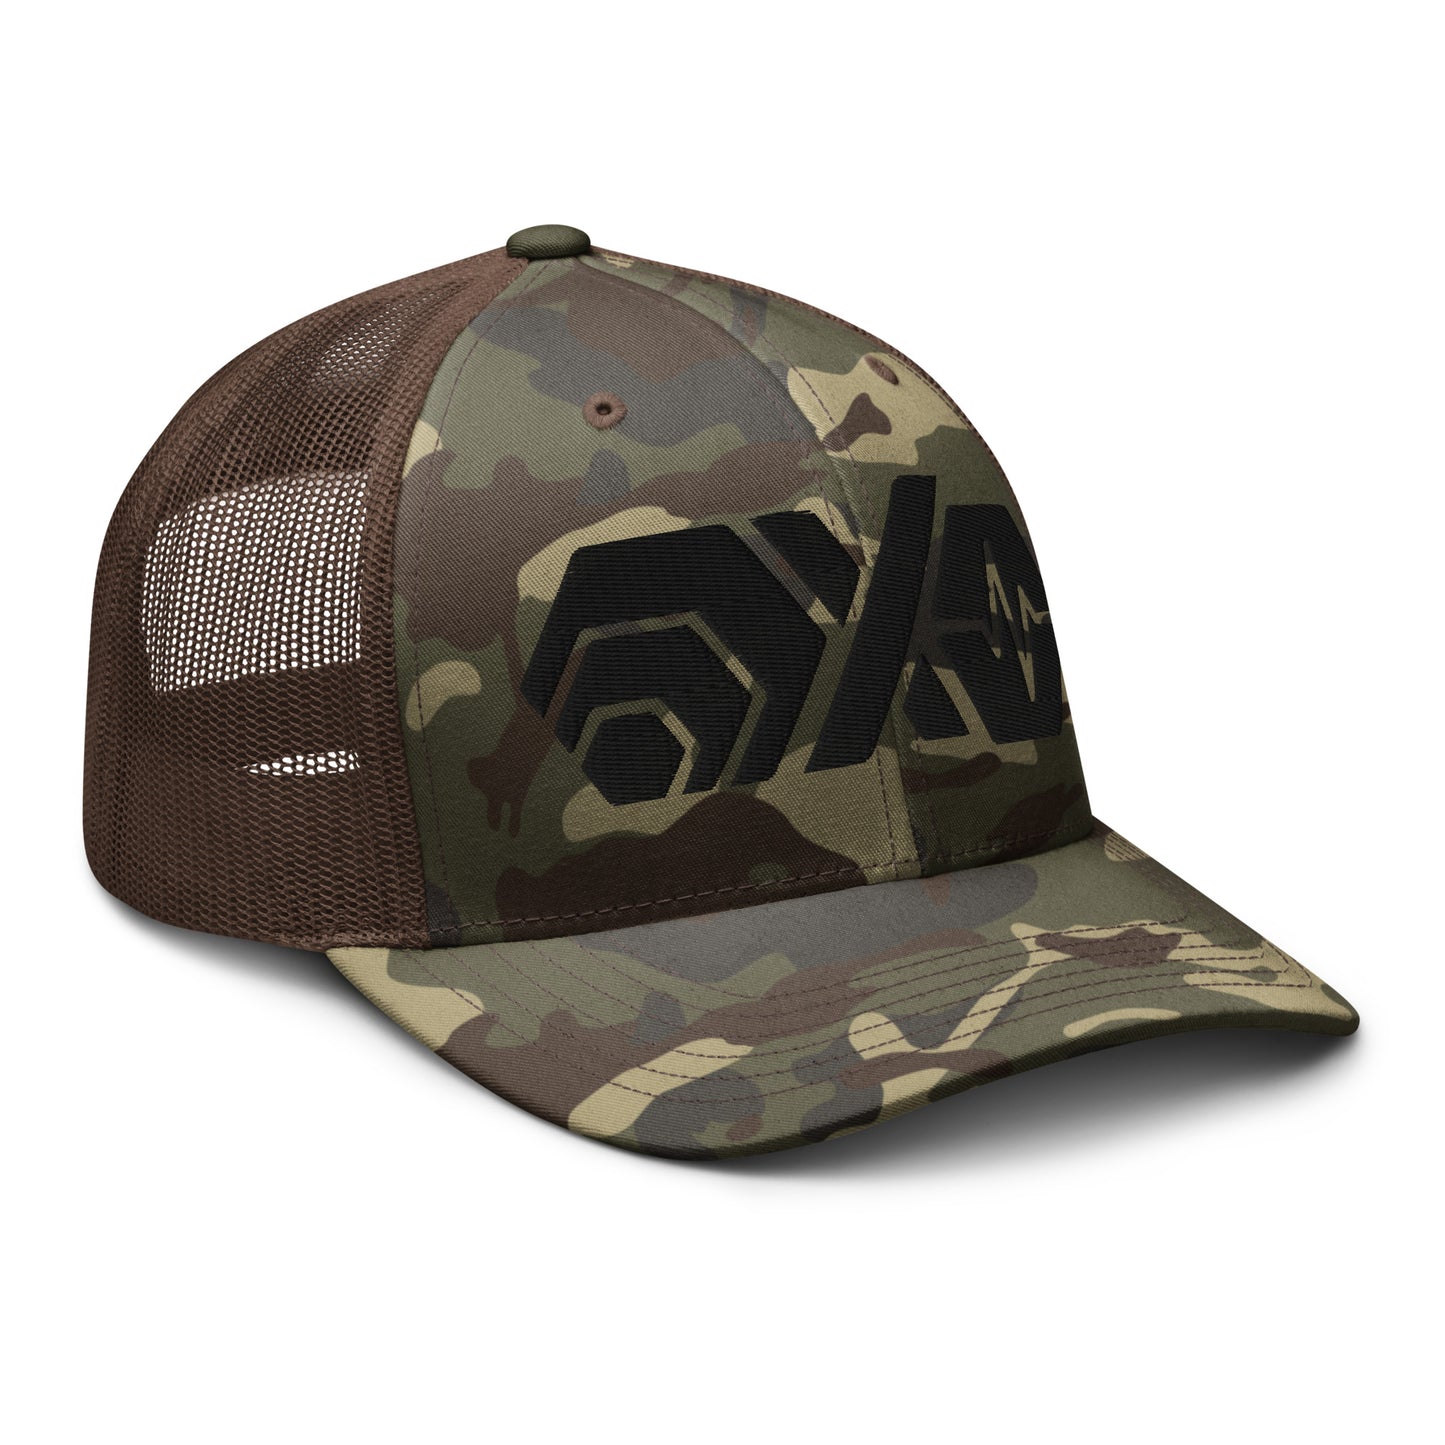 HEX PulseX and PulseChain Camouflage Trucker Hat (Embroidered)